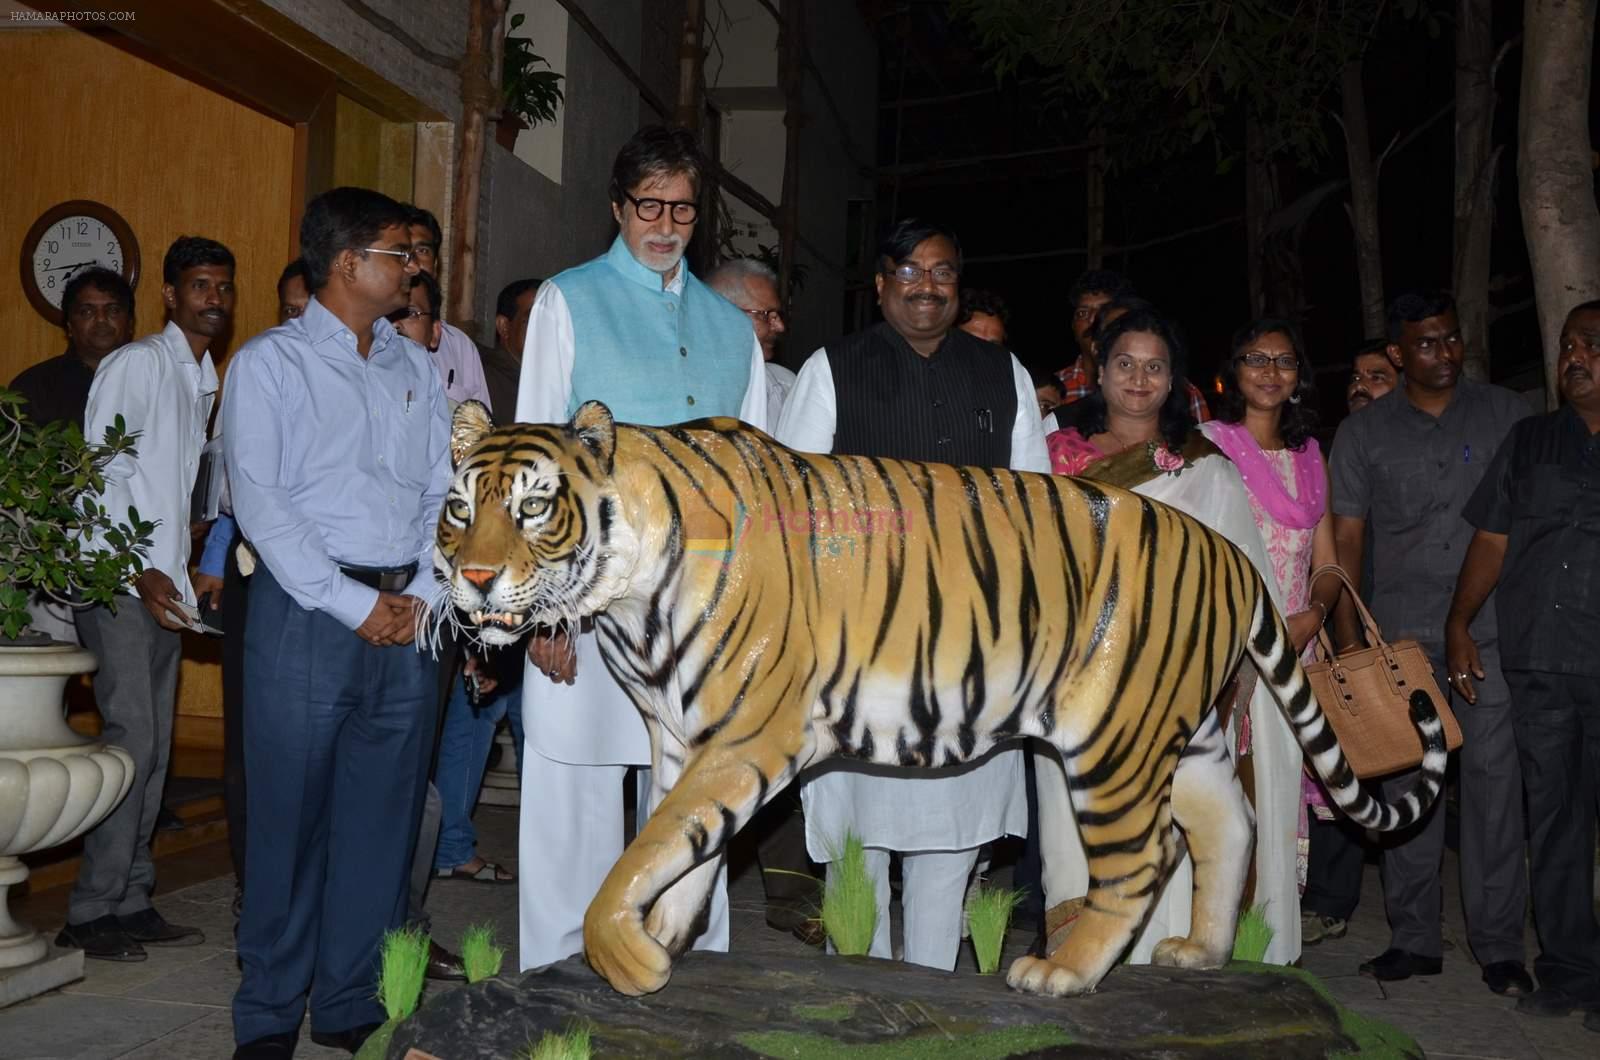 Amitabh bachchan at save the Tiger campaign in Juhu on 11th Aug 2015